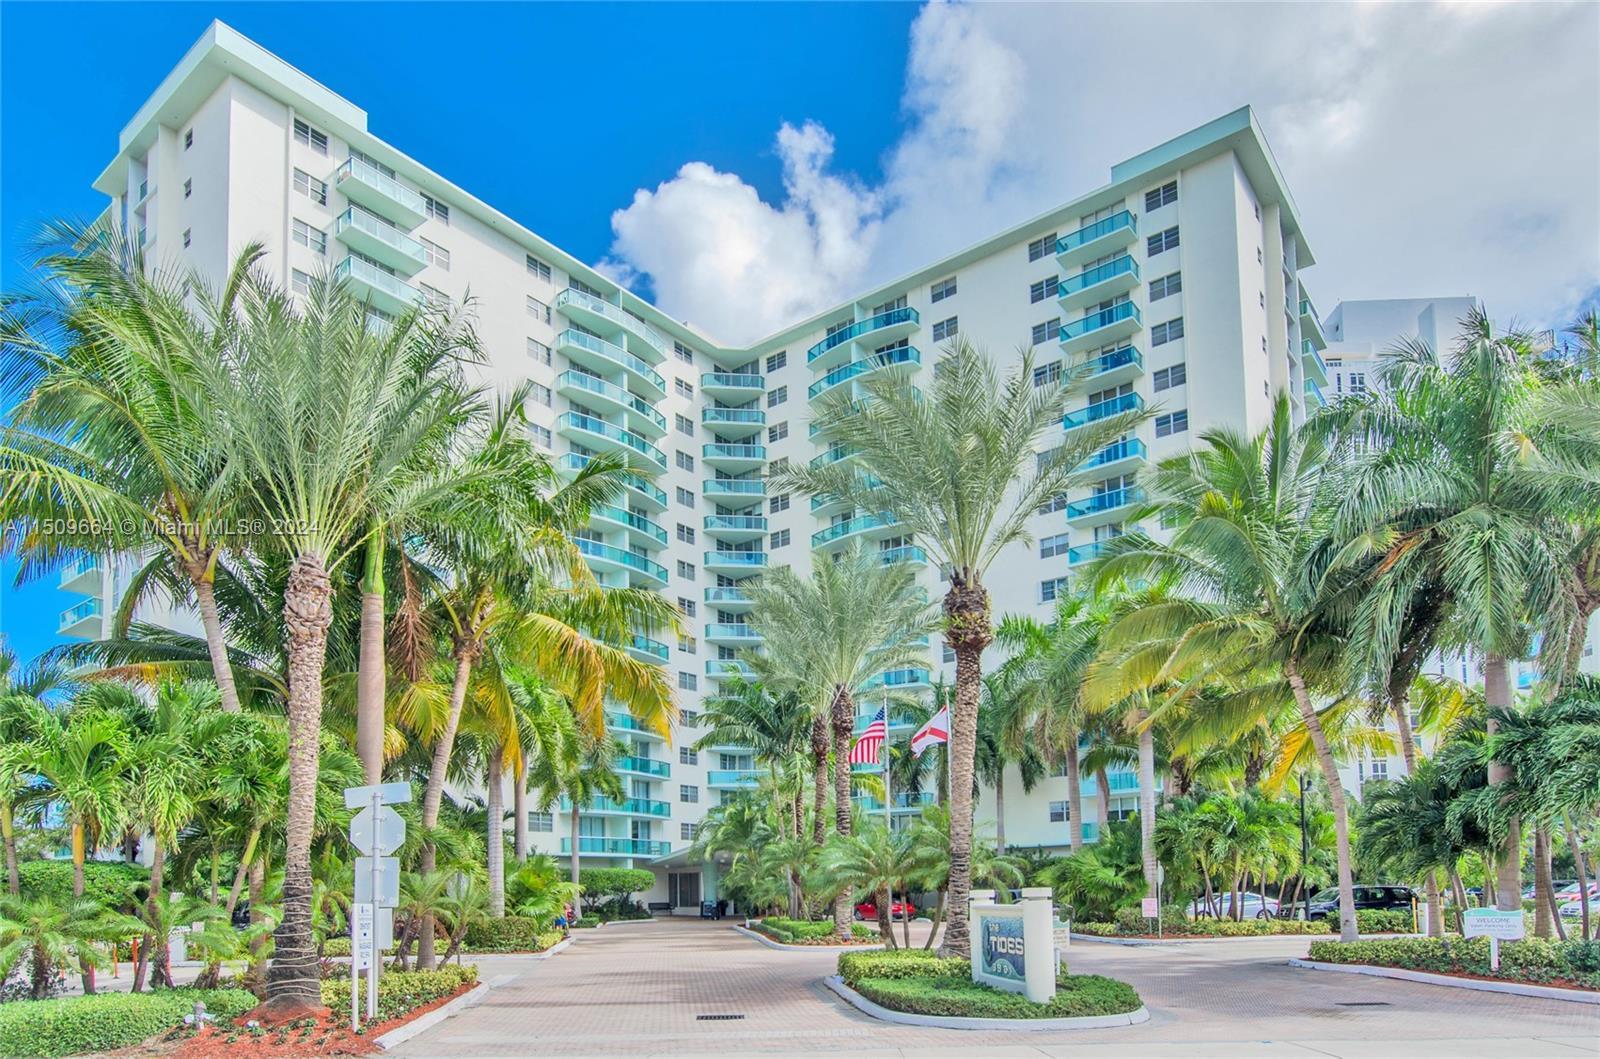 SHOWINGS AVAILABLE SAT AND SUN 4/20-21
NO RENTAL RESTRICTIONS SELLER SAYS BRING ALL OFFERS !!! 
Escape to a beach paradise whenever you desire! This 1/1 beachfront condo offers a perfect blend of luxury, convenience, and exclusivity, making it an attractive option for both vacation and full-time living. Located on the 1st floor which eliminates the need for an elevator, providing easy and quick access to your unit. Enhancing the overall appeal of this unit, it features the convenience of 2 deeded covered parking spots, and a direct & semi-private beach access providing a tranquil patio to relax with your morning coffee or afternoon drink. Amenities include 24-hour security, on-site fitness facility, valet and the spectacular ocean front p